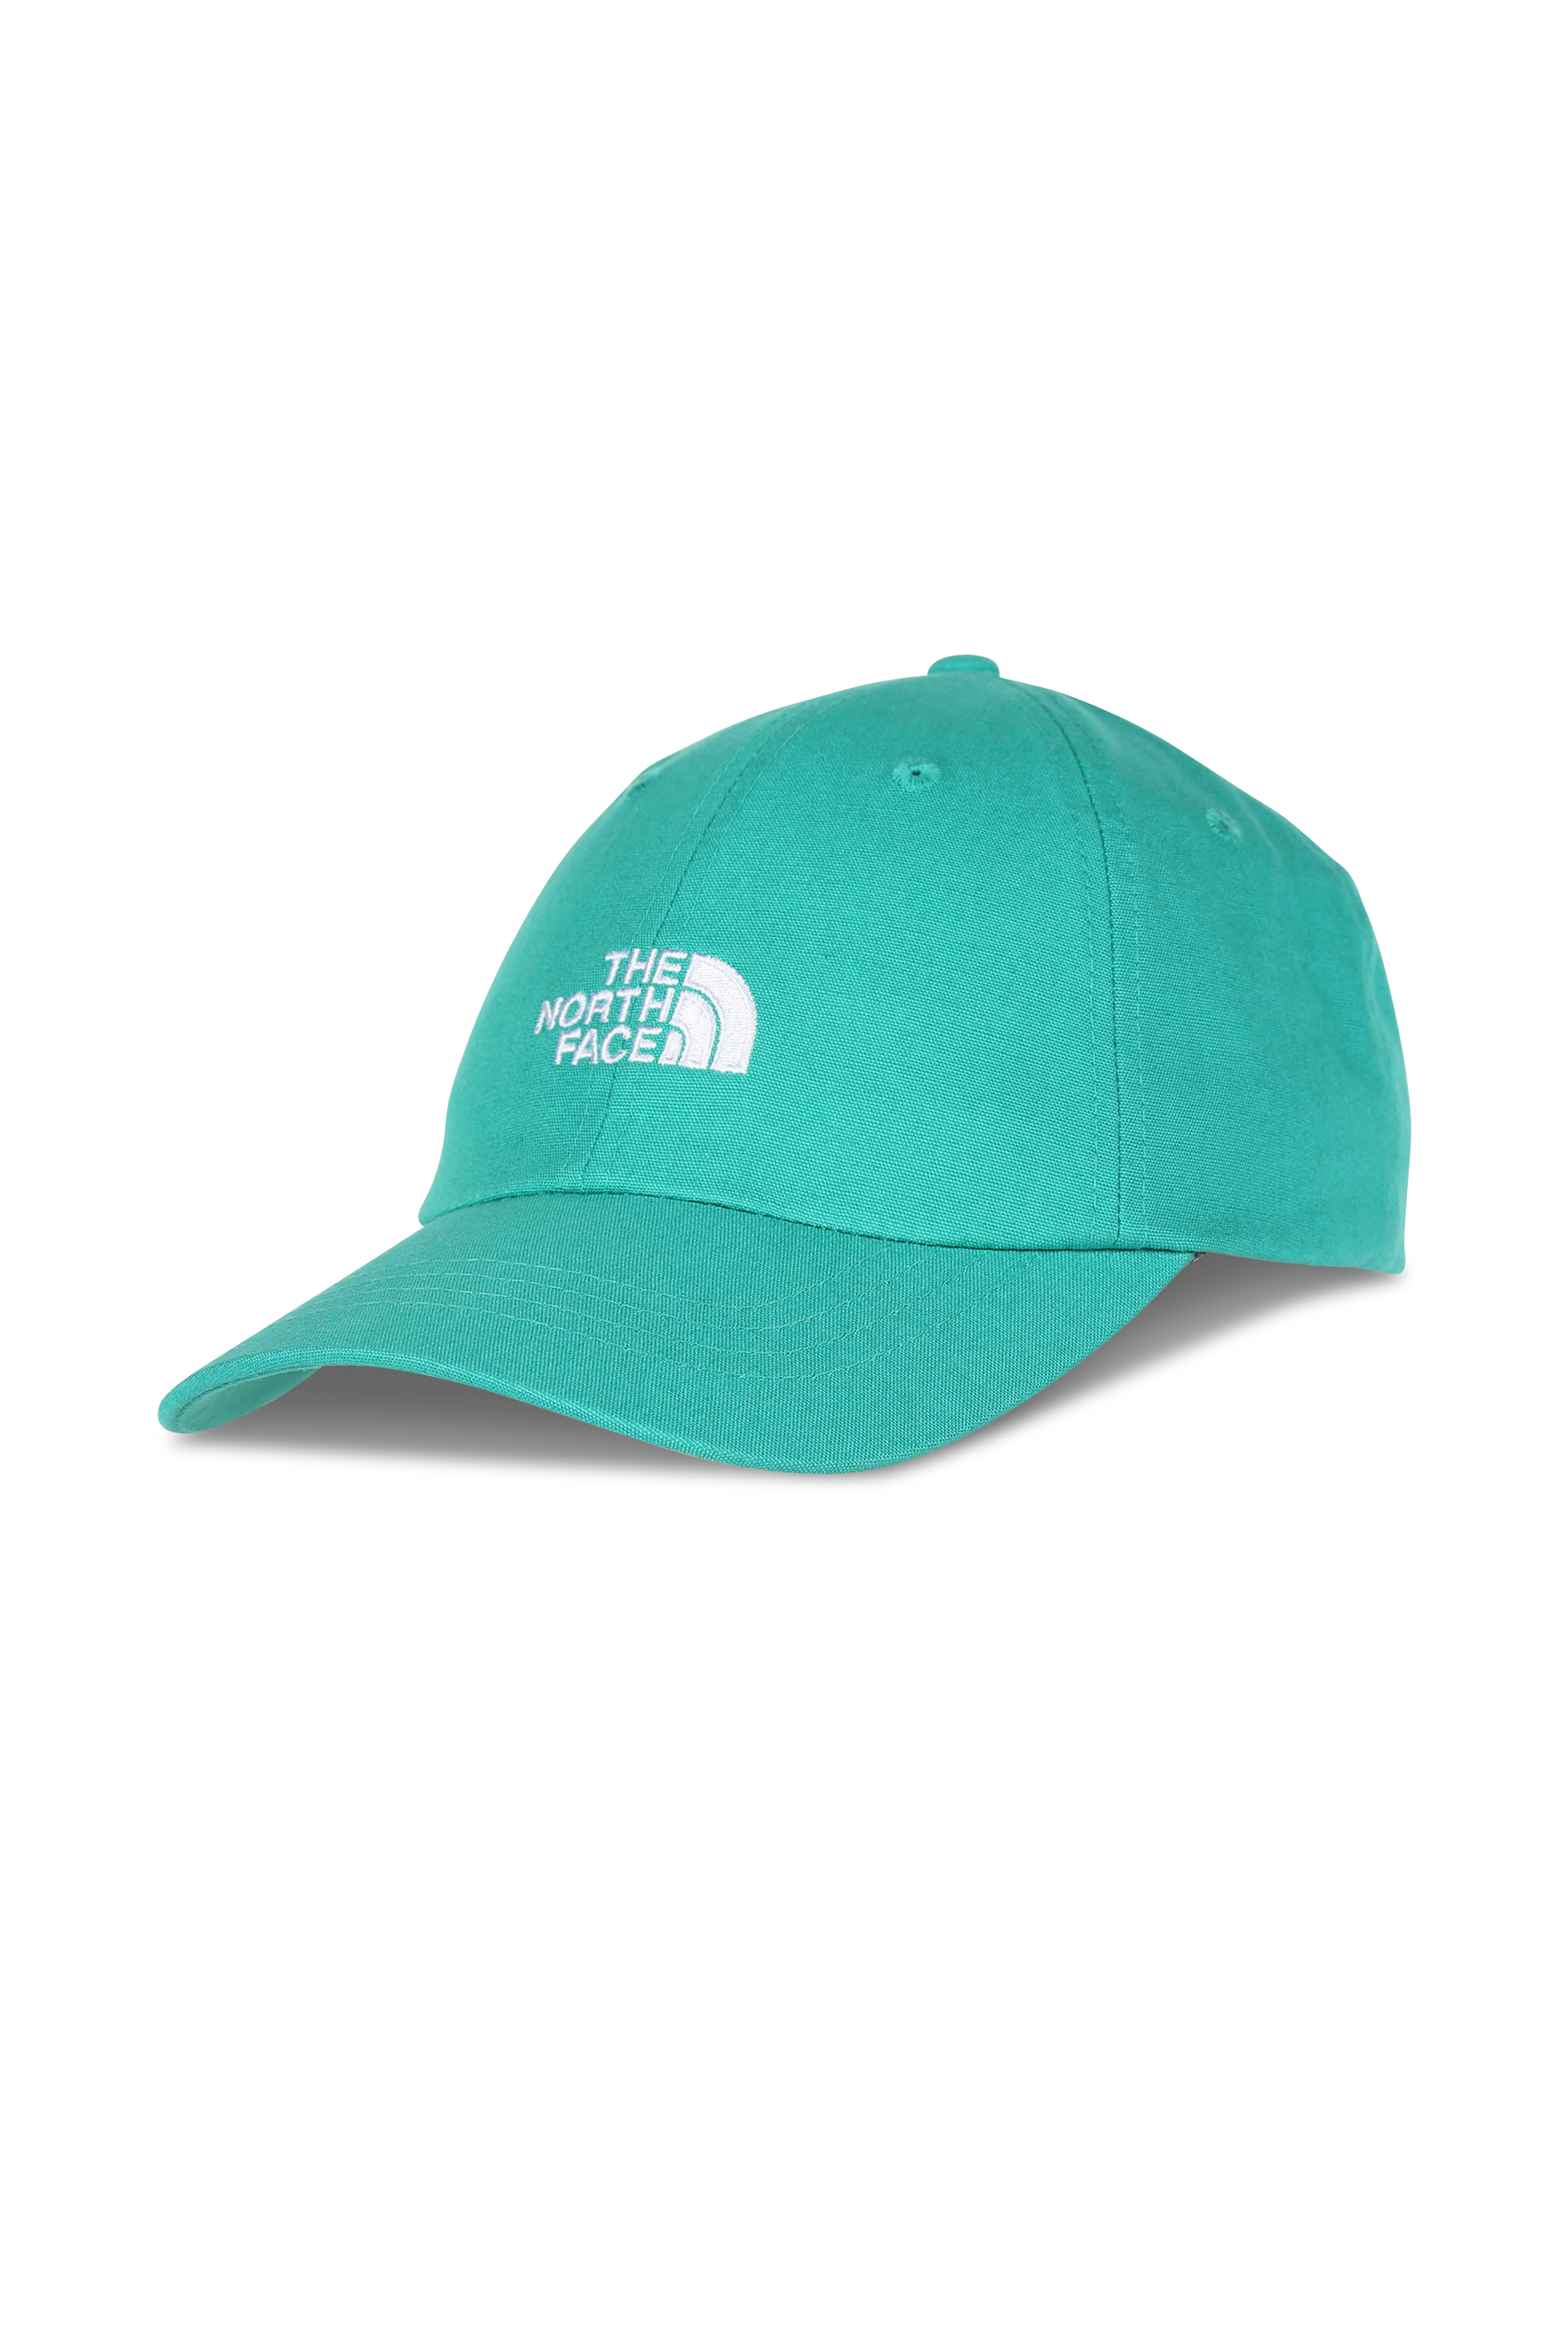 The North Face - Casquette - Taille TU